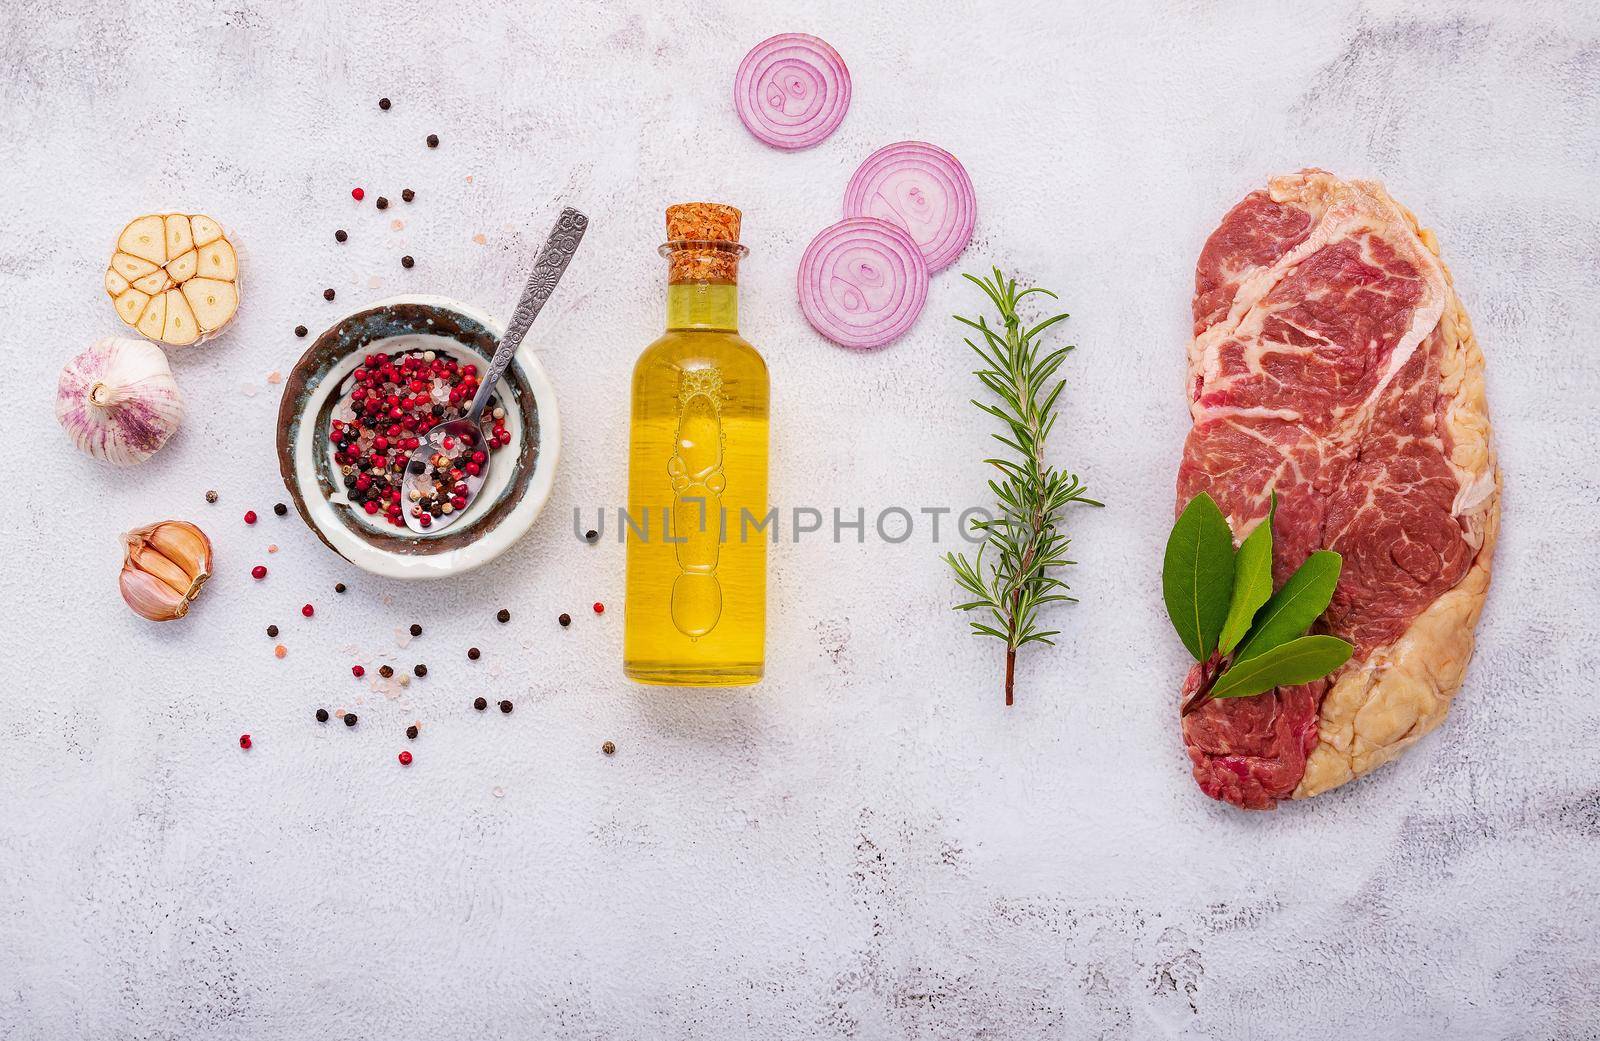 


Raw Striplion Steak set up on white concrete background. Flat Lay of fresh raw beef steak with rosemary and spice on white shabby concrete background top view.
